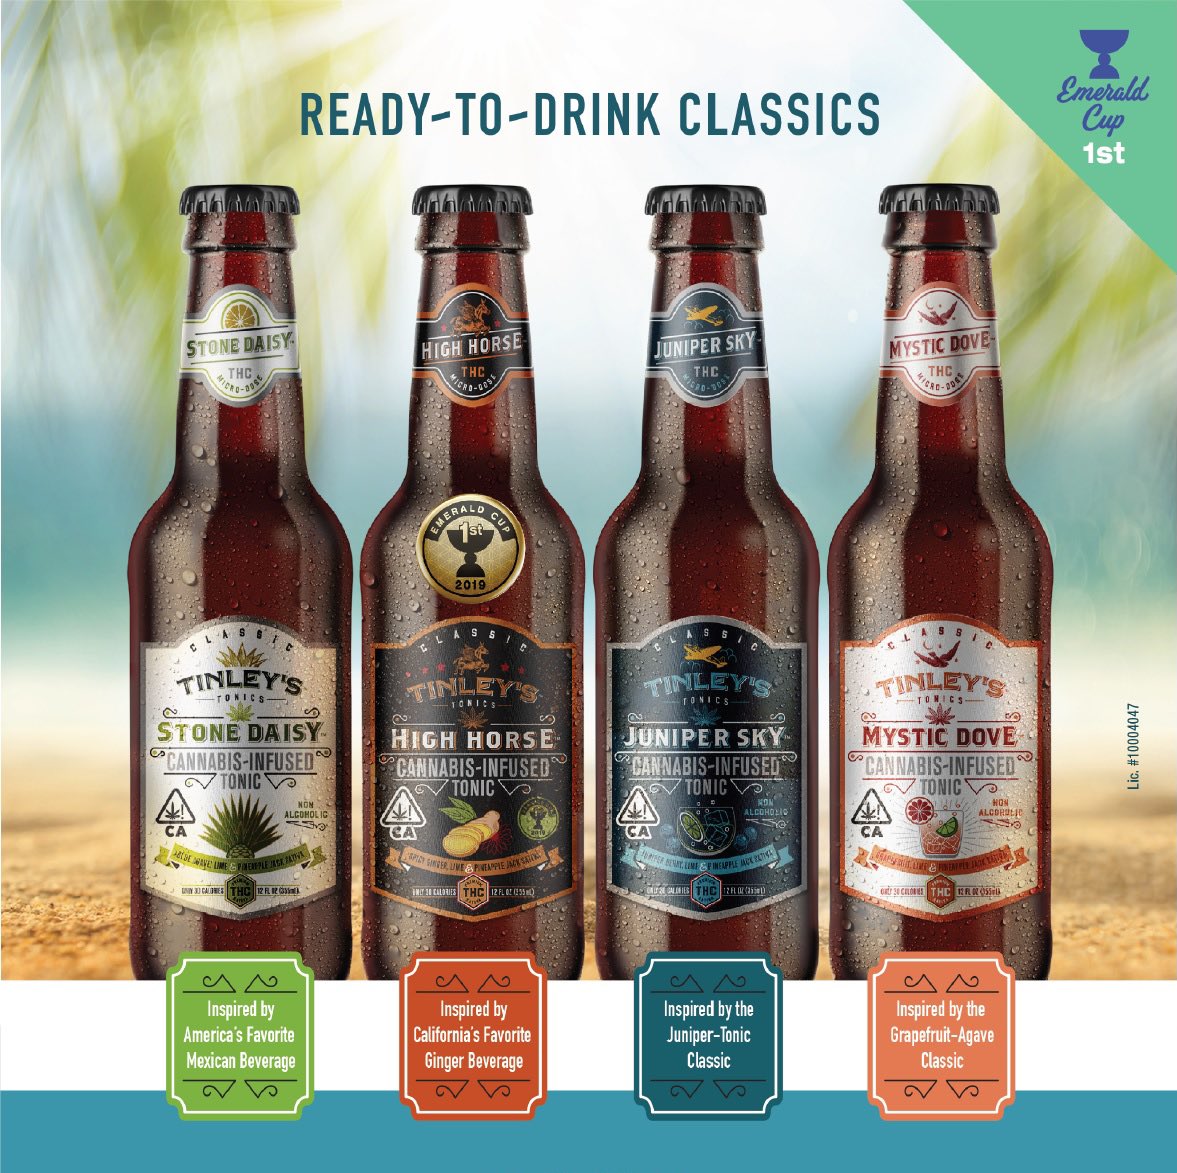 Tinley’s #nonalcoholic #microdose classics, now available from Mars HQ Distro @weareyourhq Call your rep for weekly delivery #pineapplejack #sativa #vegan #glutenfree #kosher 30 calories #emeraldtriangle-sourced, 4 delicious flavors